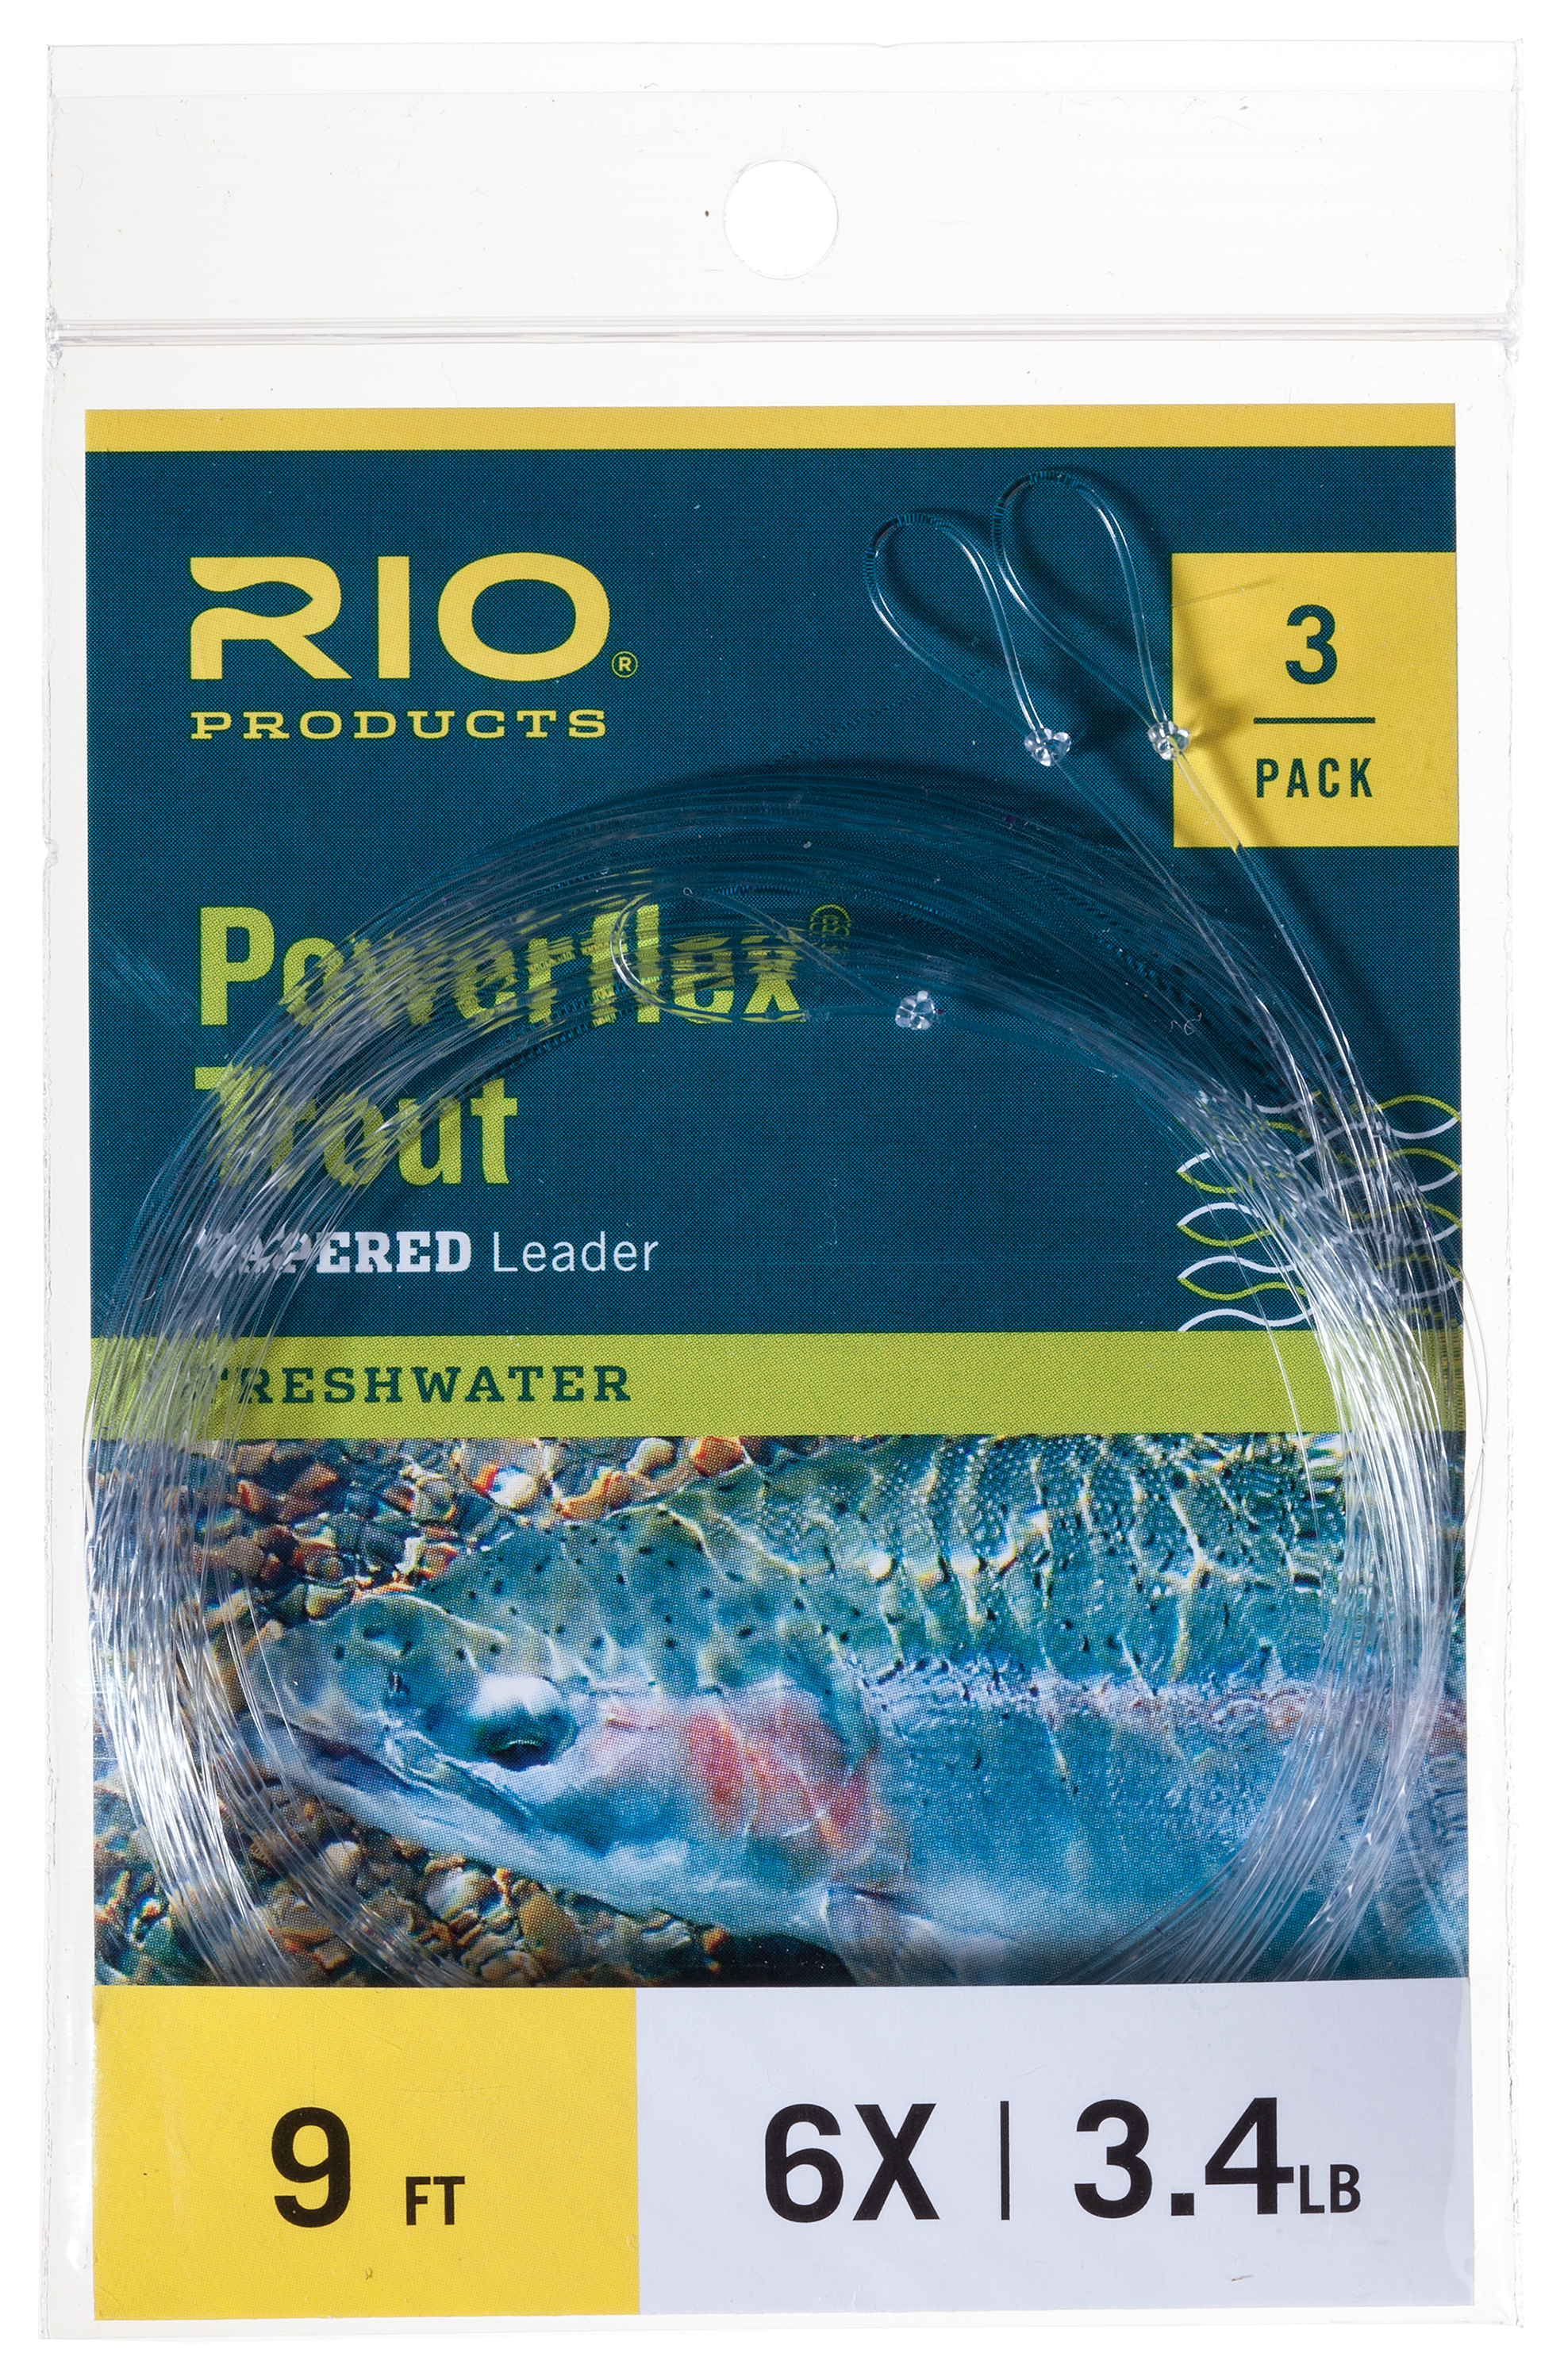 RIO Powerflex Trout Tapered Leaders - 3 Pack